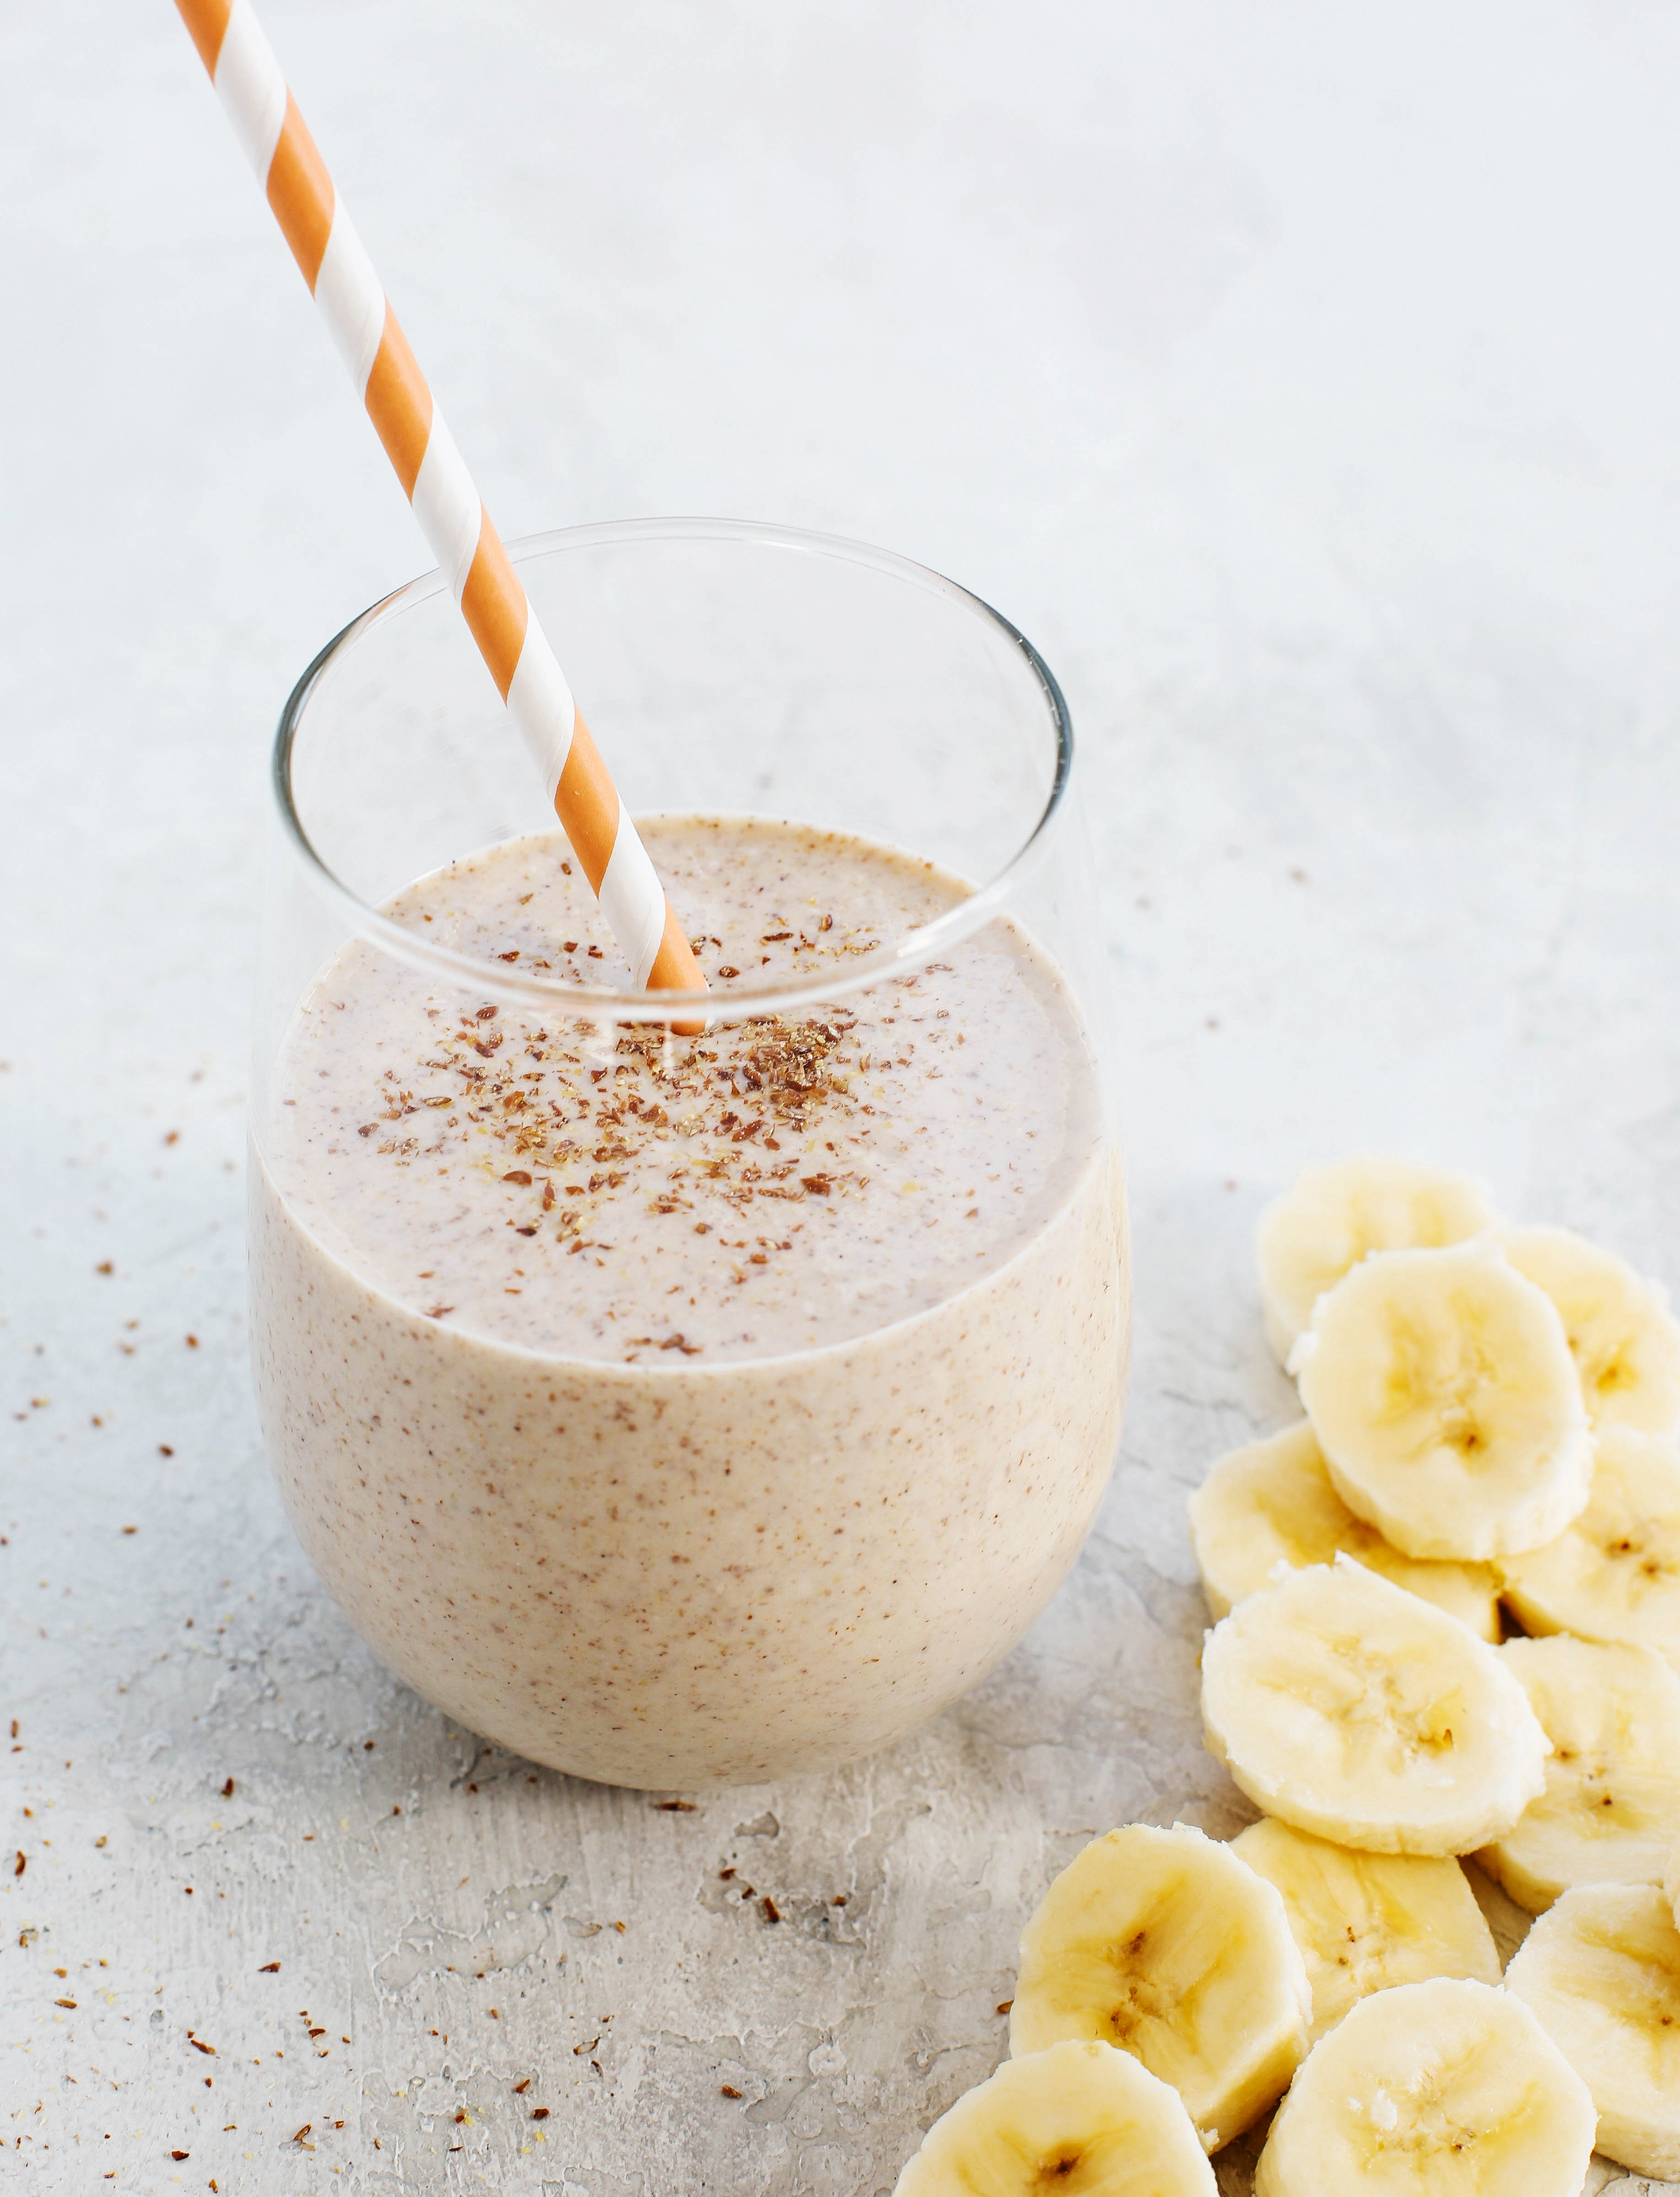 Start your morning off with this thick and creamy Banana Oat Breakfast Smoothie that is healthy, delicious and super quick to make! #dairyfree #vegan